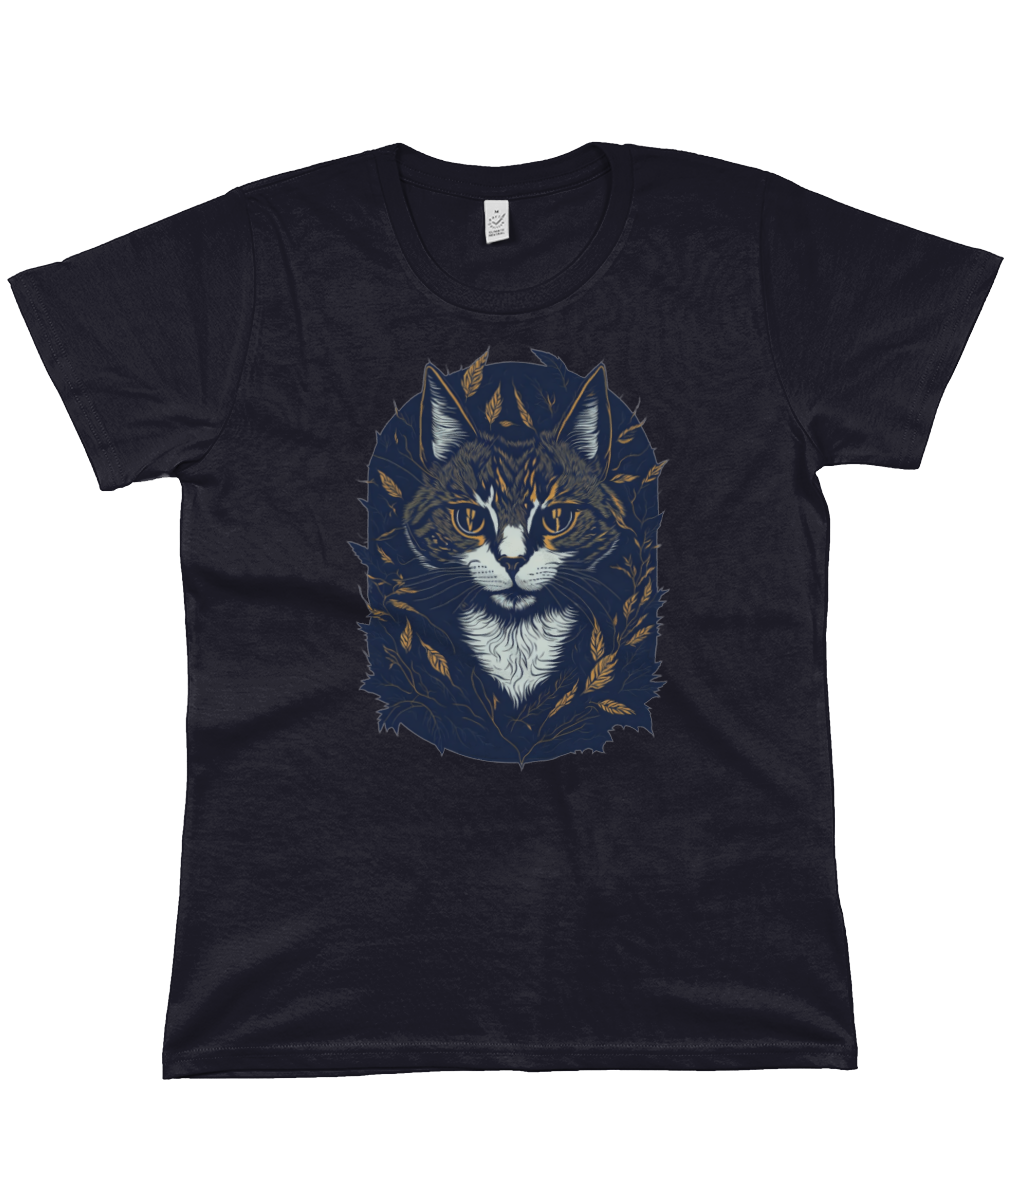 Fans of Catastic "Glaring Glance" Classic Jersey Women's T-Shirt